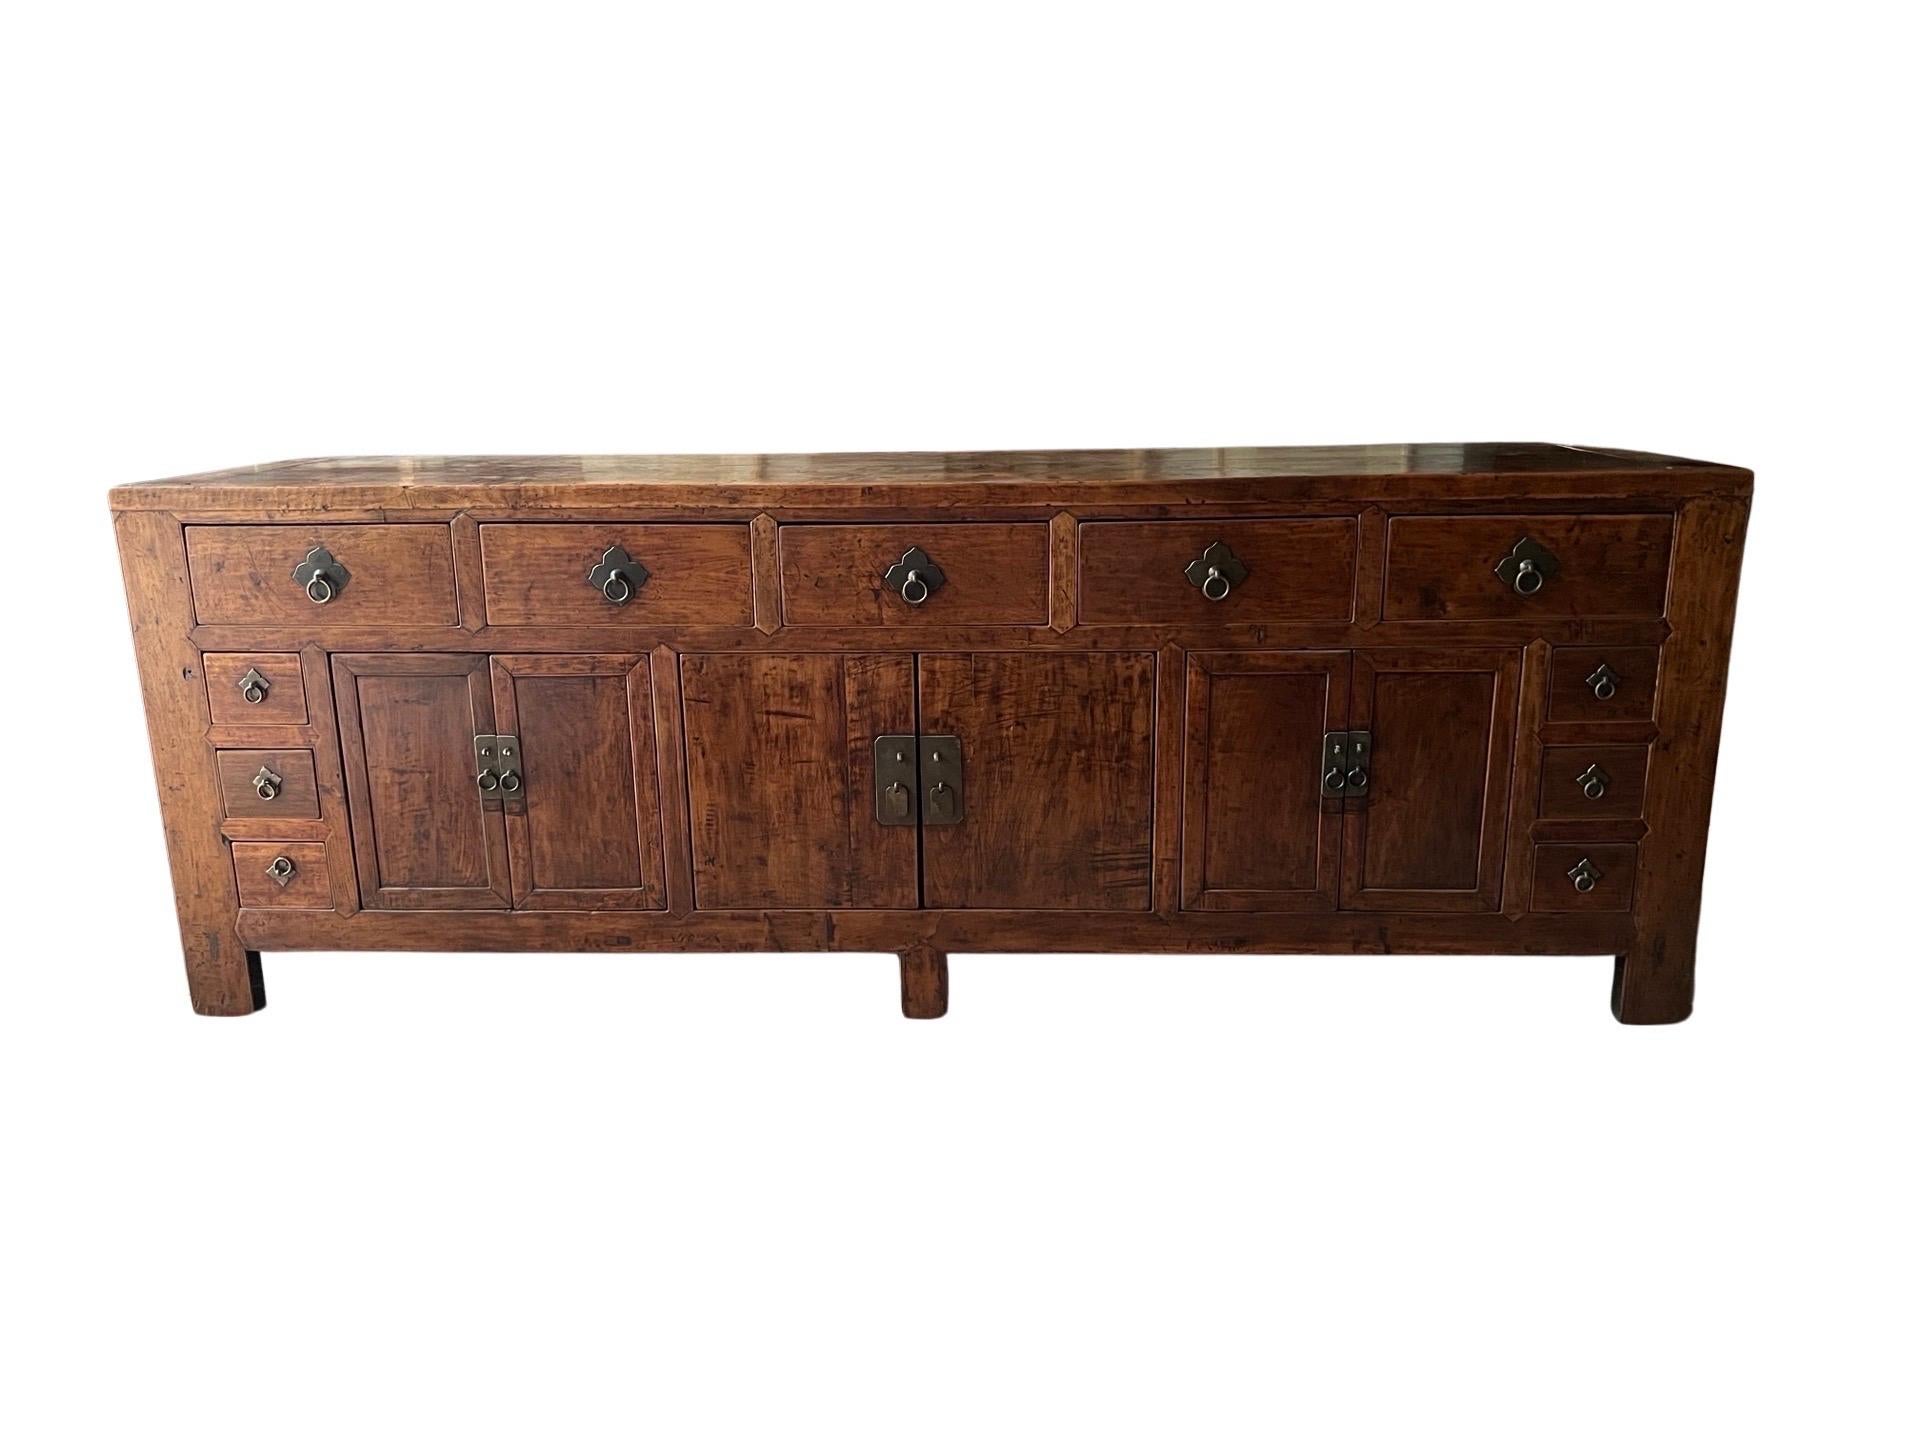 Chinese Export 19th C. Monumental & Important Qing Dynasty Chinese Double Sided Sideboard For Sale